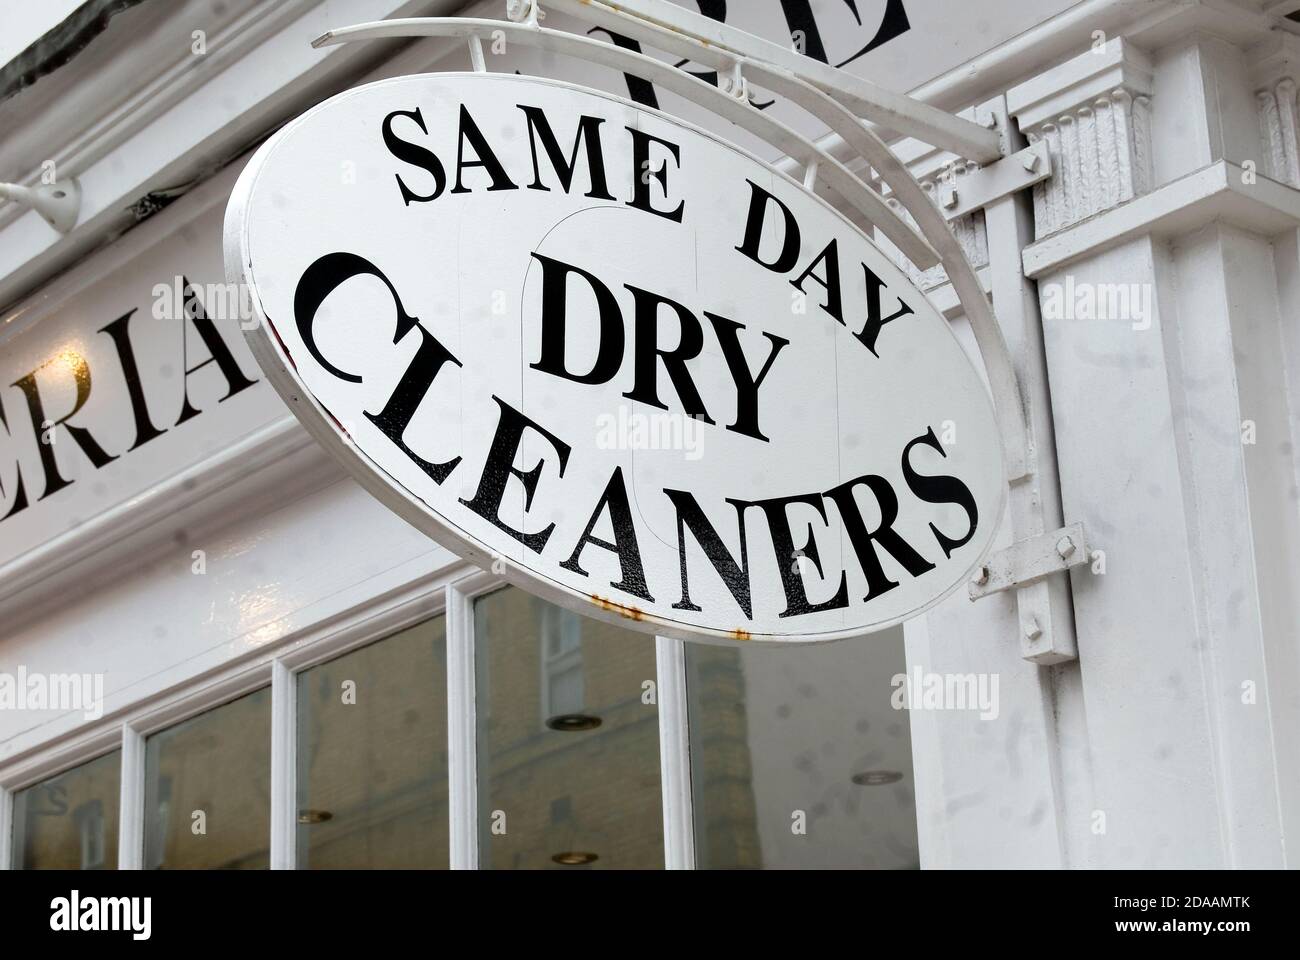 Drycleaners Shop Stock Photo